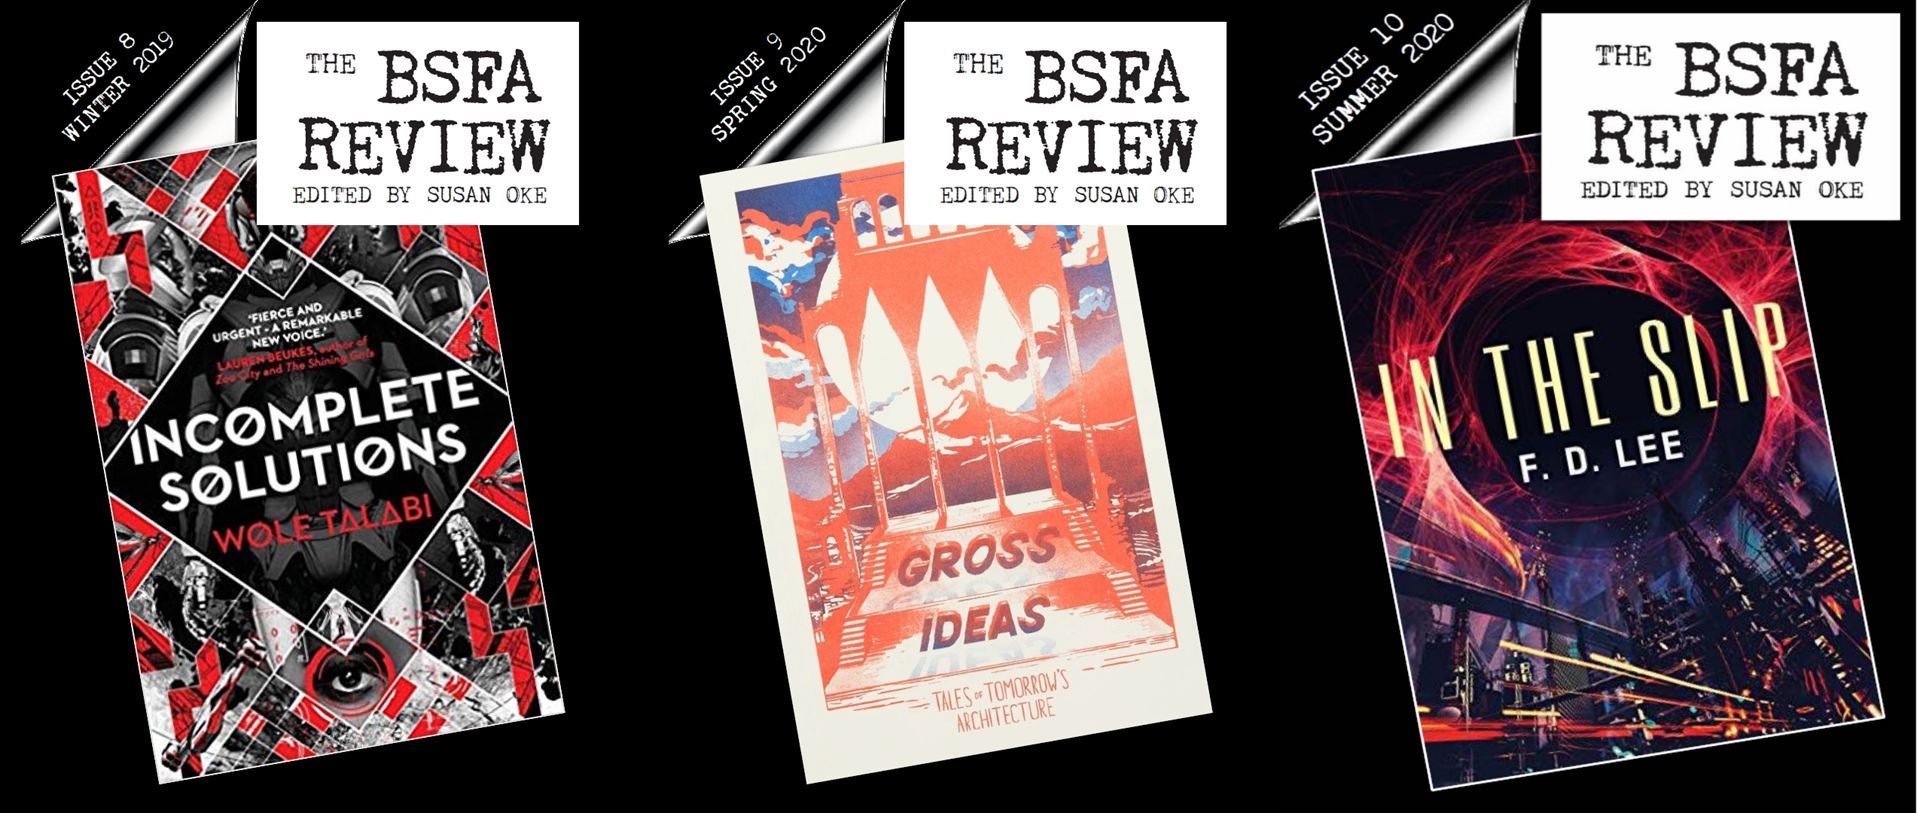 The BSFA Review 8, 9 and 10